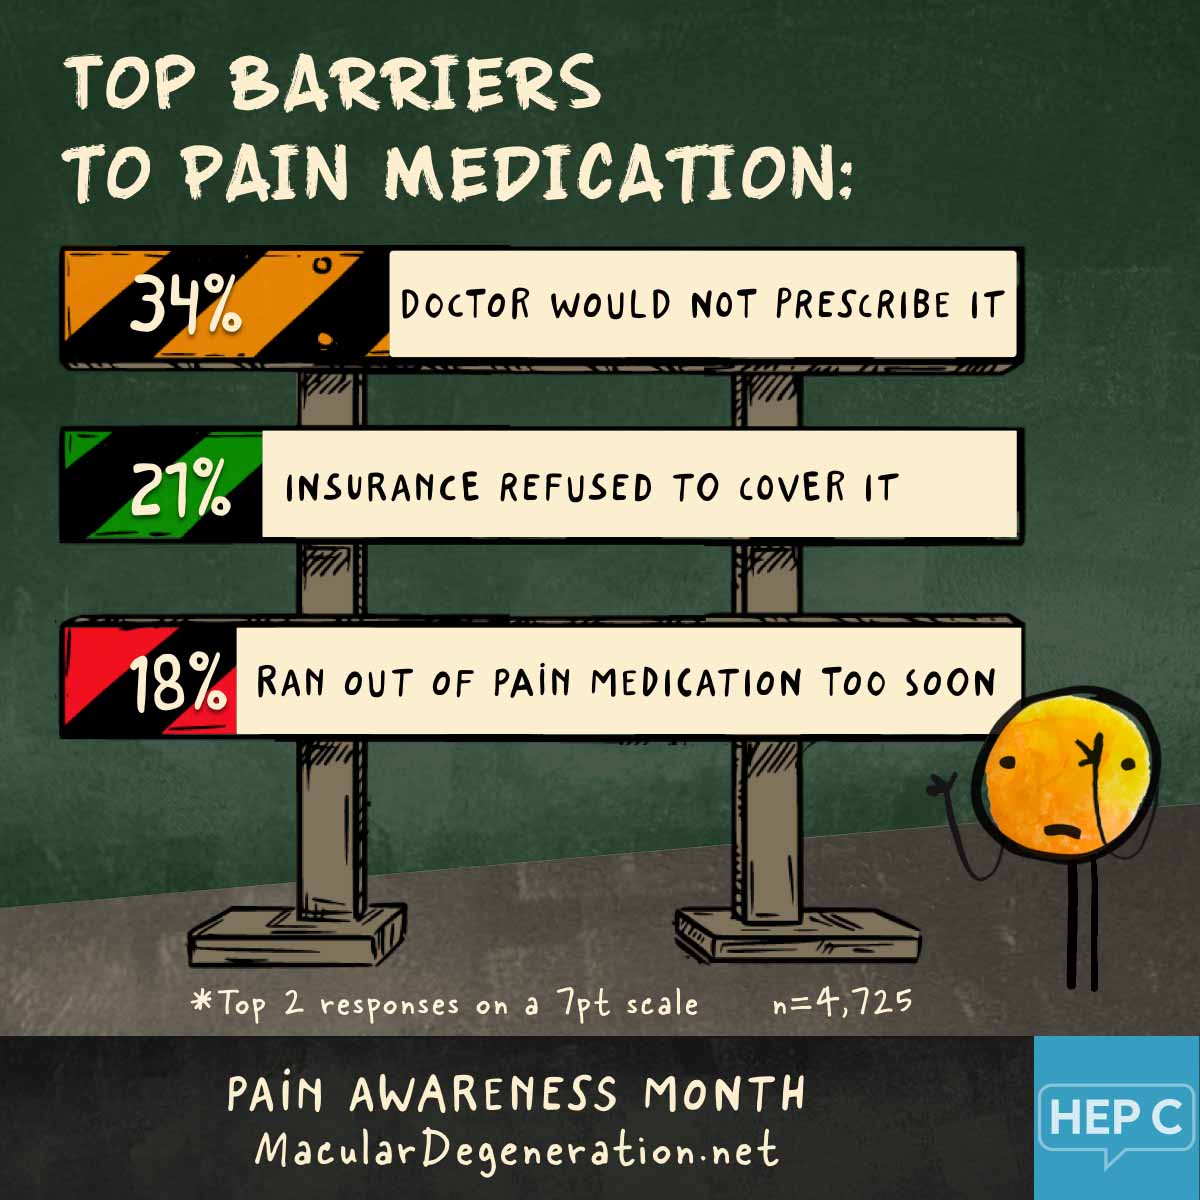 Barriers to pain medication are that the doctor wouldn’t prescribe it, insurance didn’t cover it, or ran out too soon